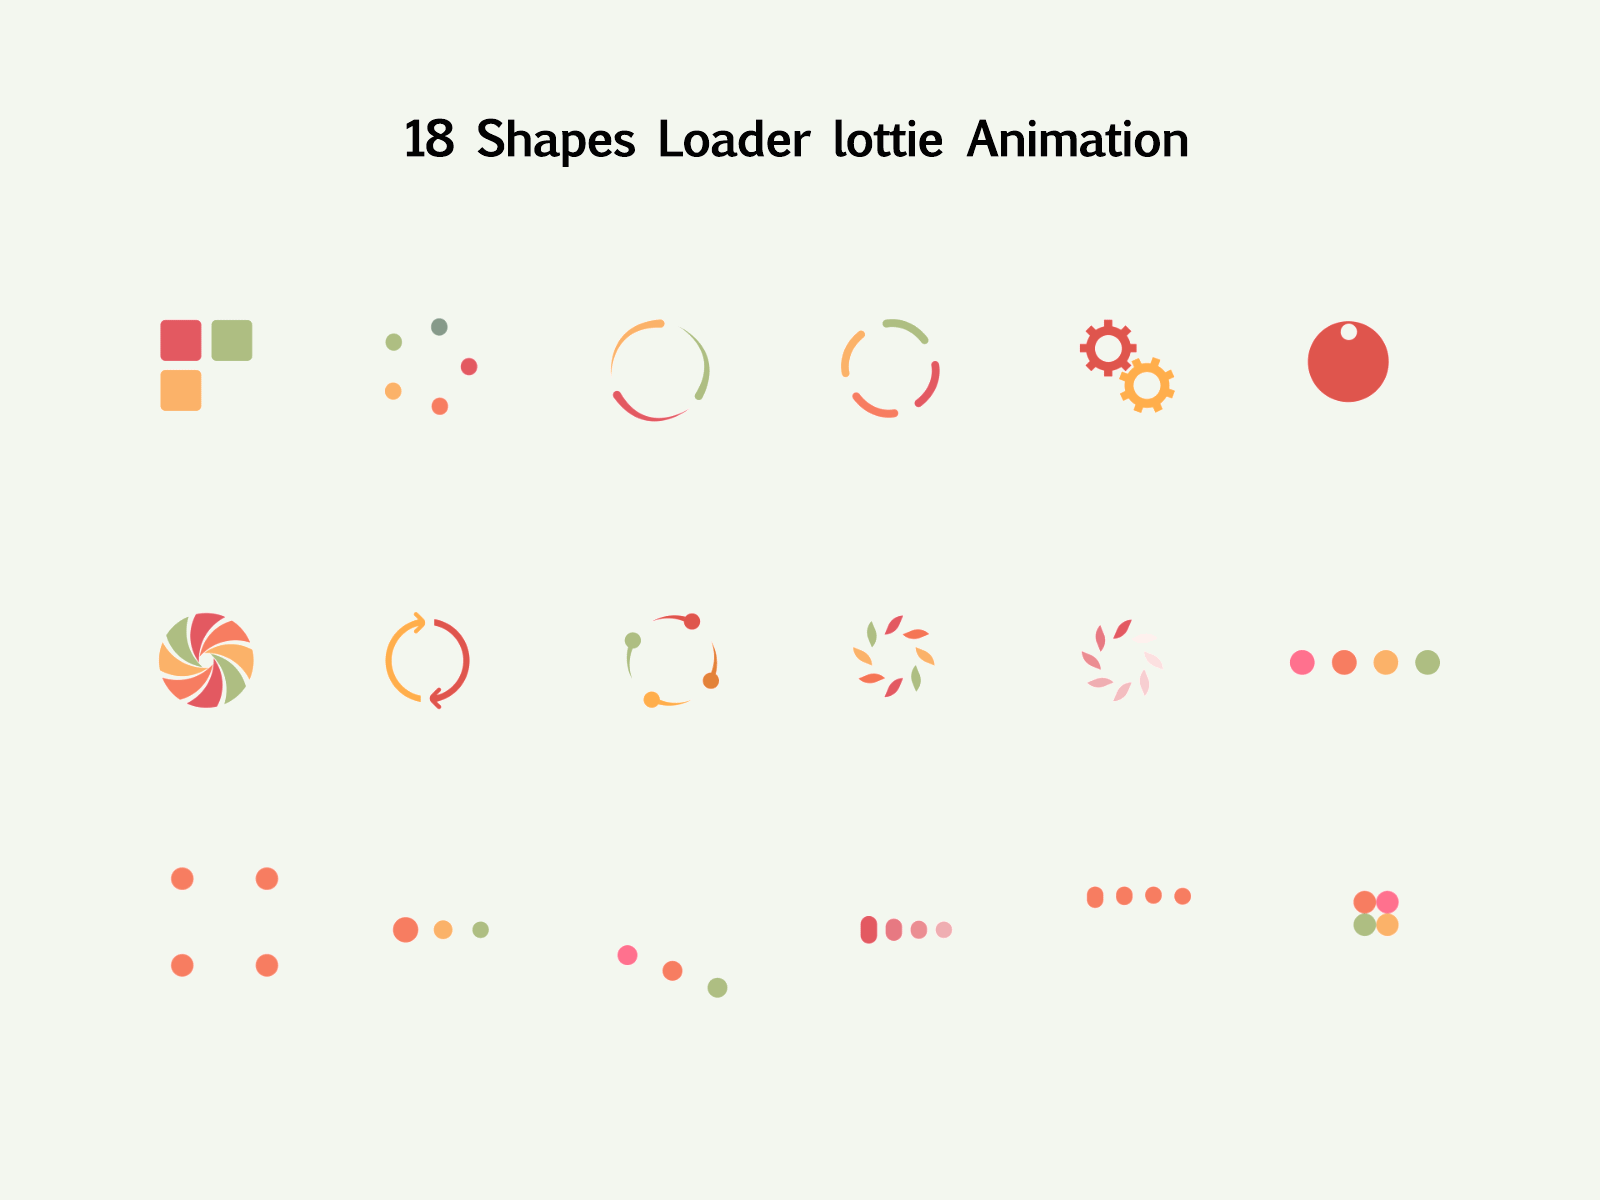 Loading Animation | After Effects Template buffer load state loader loader shape loading loading circle loading dots loading lines loading state preloader progress reload square waiting